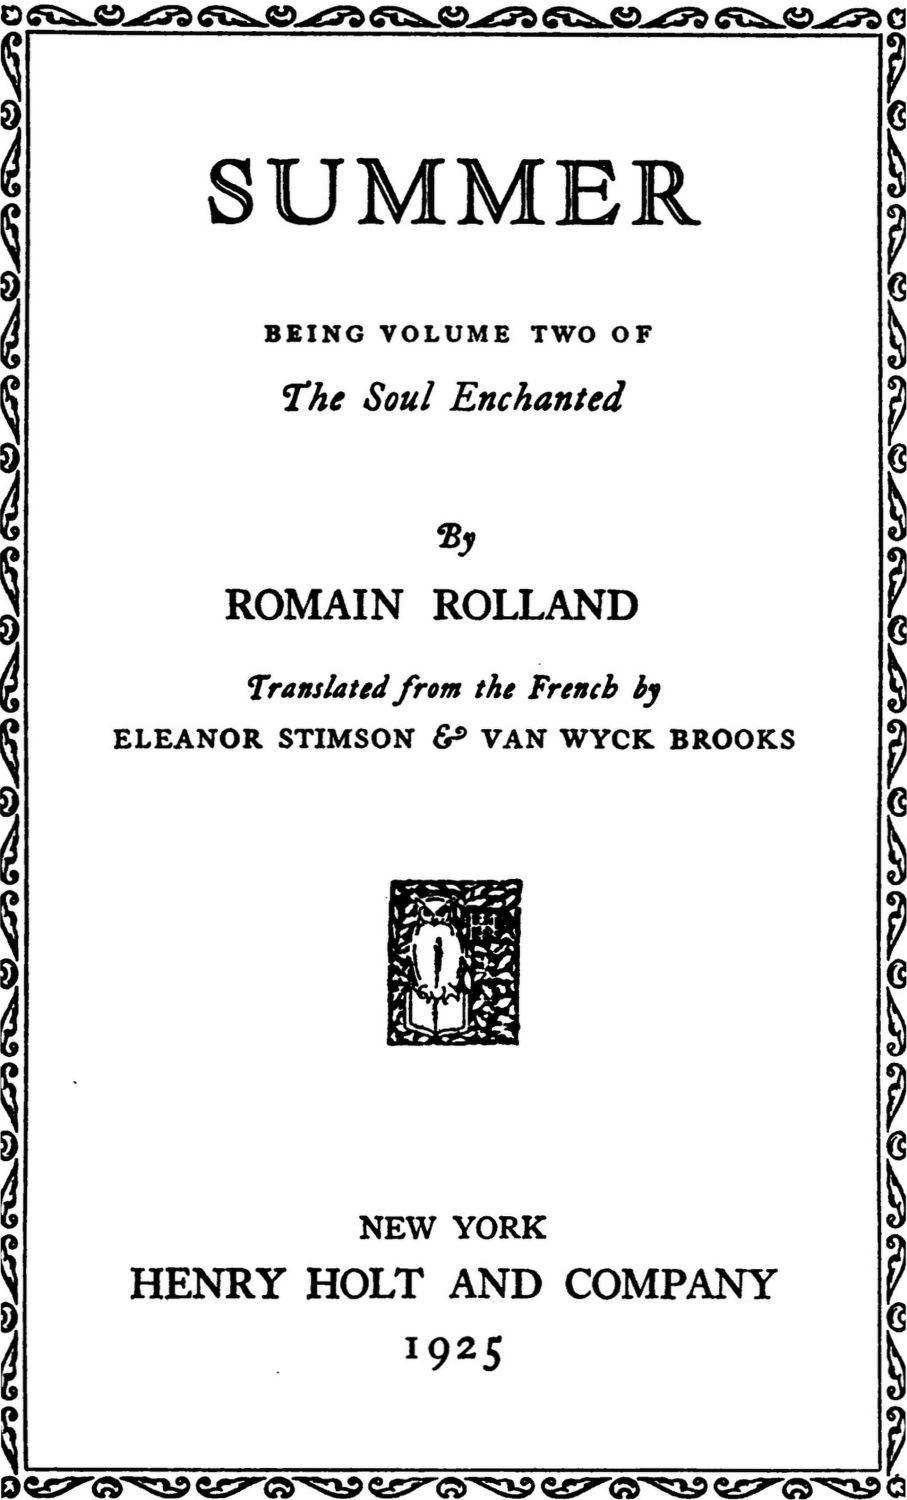 The Project Gutenberg eBook of Summer, by Romain Rolland. image